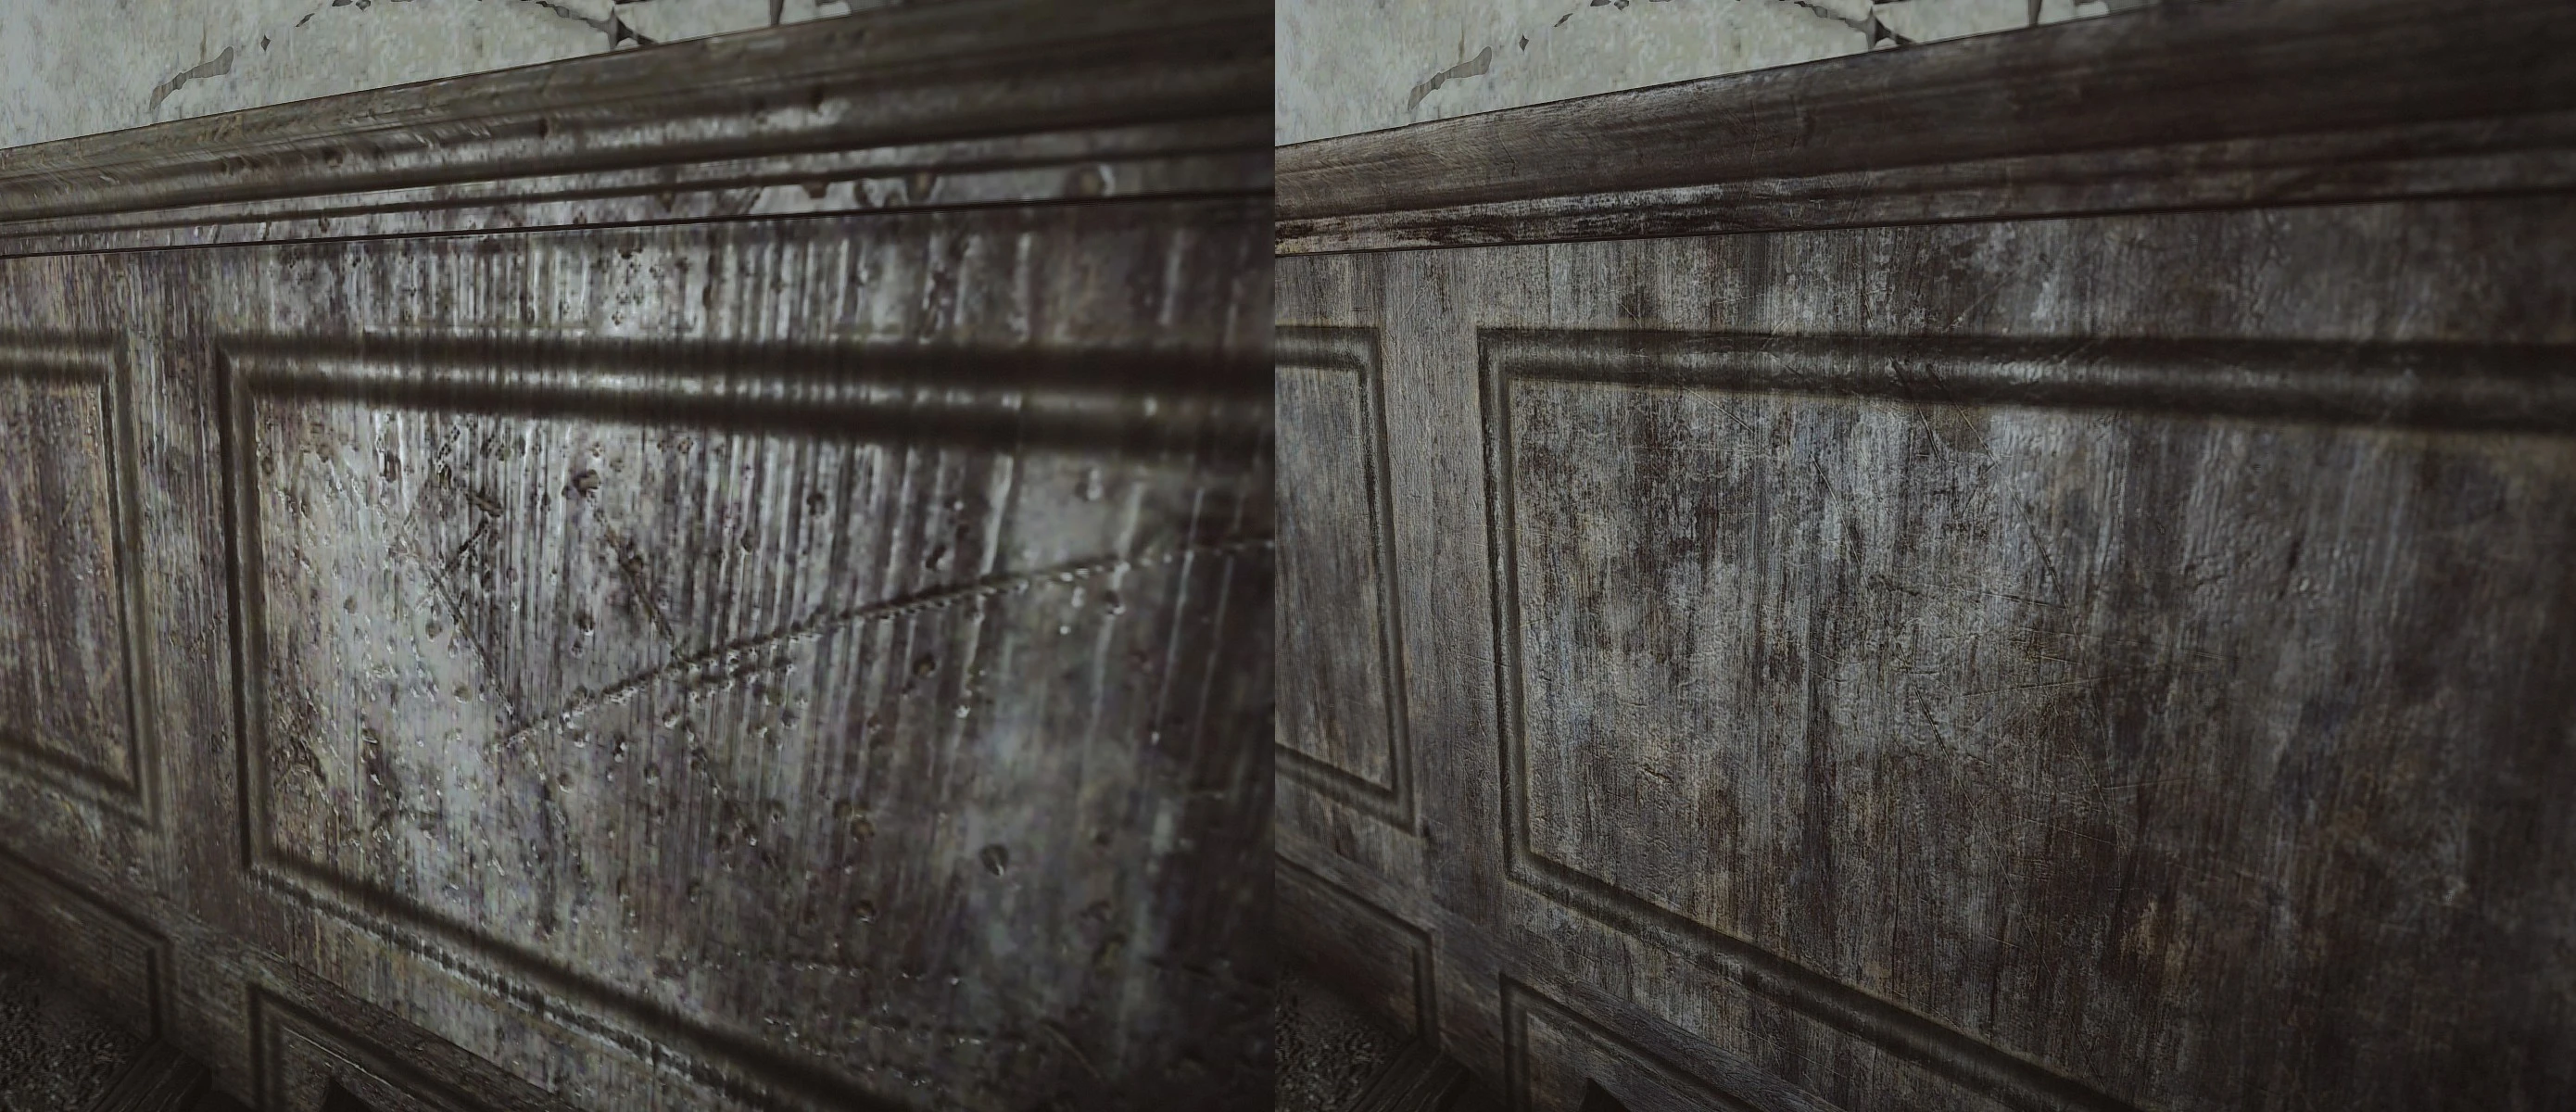 Fallout 4 high resolution texture pack comparison фото 8